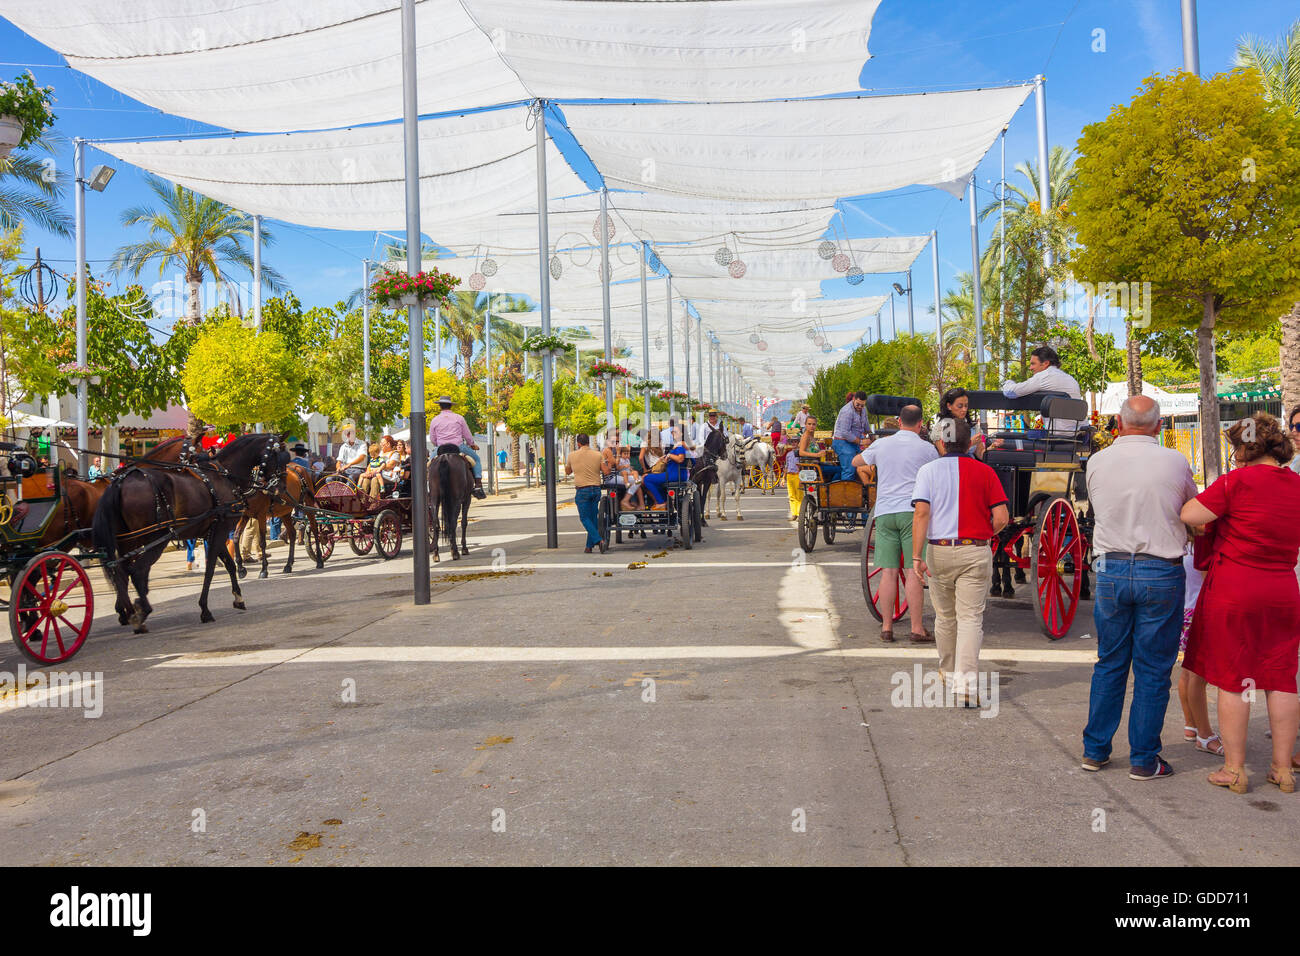 ANDUJAR,SPAIN - September, 6:  tents and umbrellas to avoid the sun during the famous Andalusian Horse Fair on September, 6, 201 Stock Photo